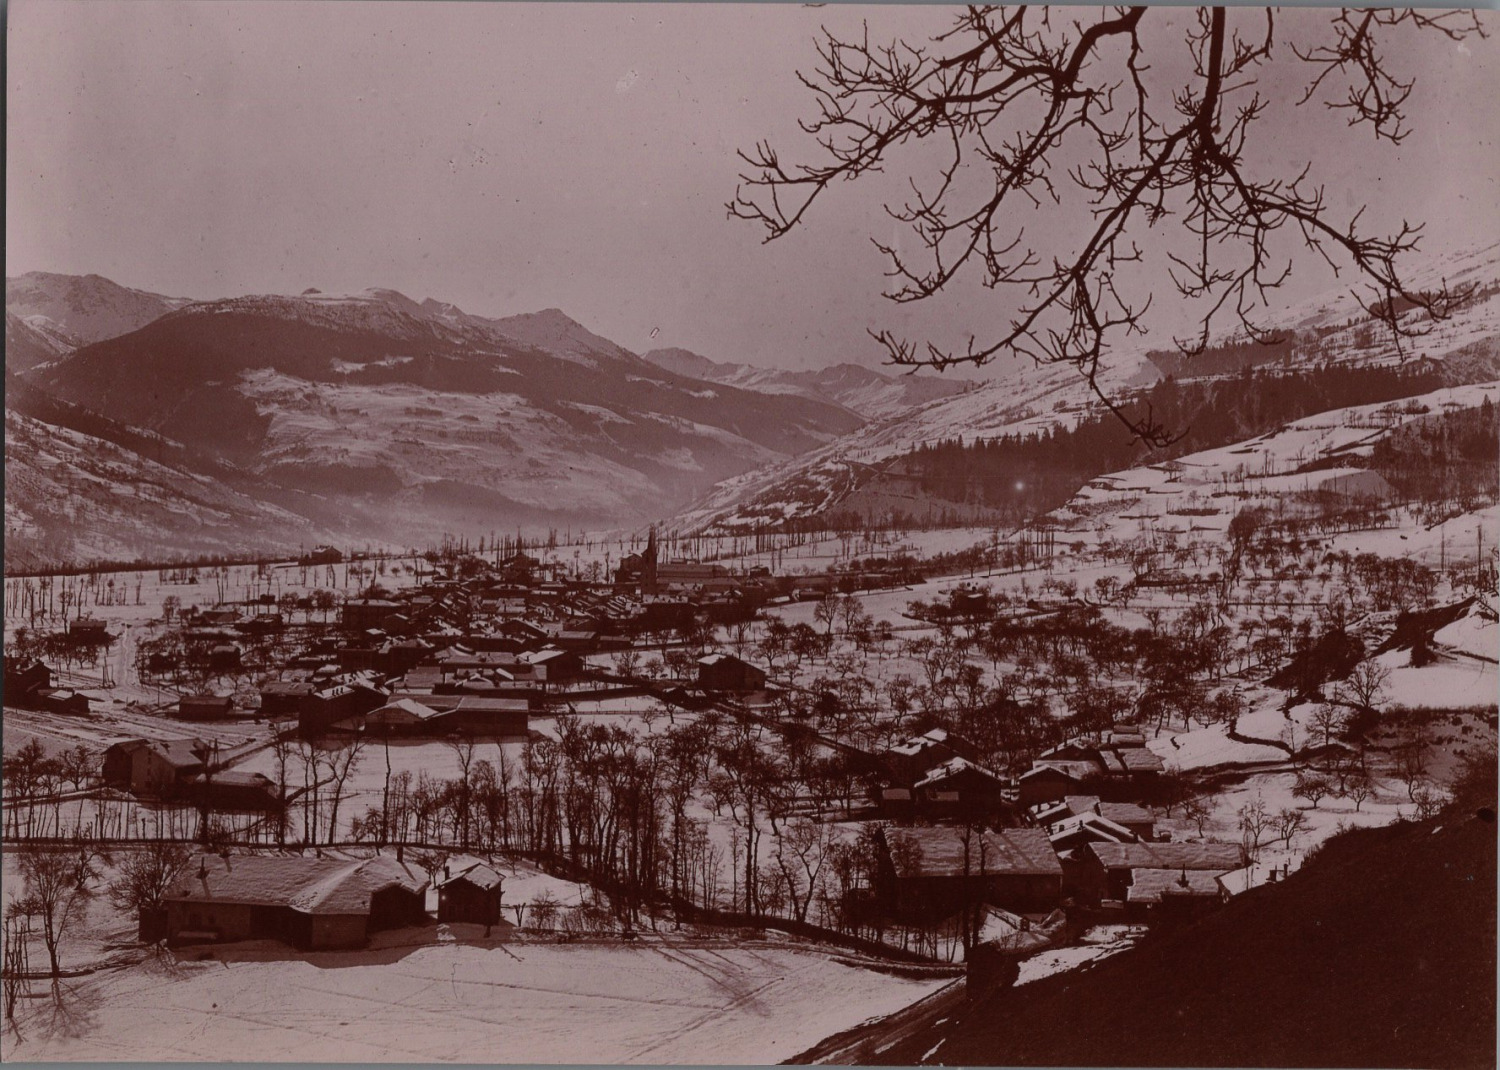 France, Bourg Saint Maurice, view of the Chatela trail vintage print, print d& print print print print print print